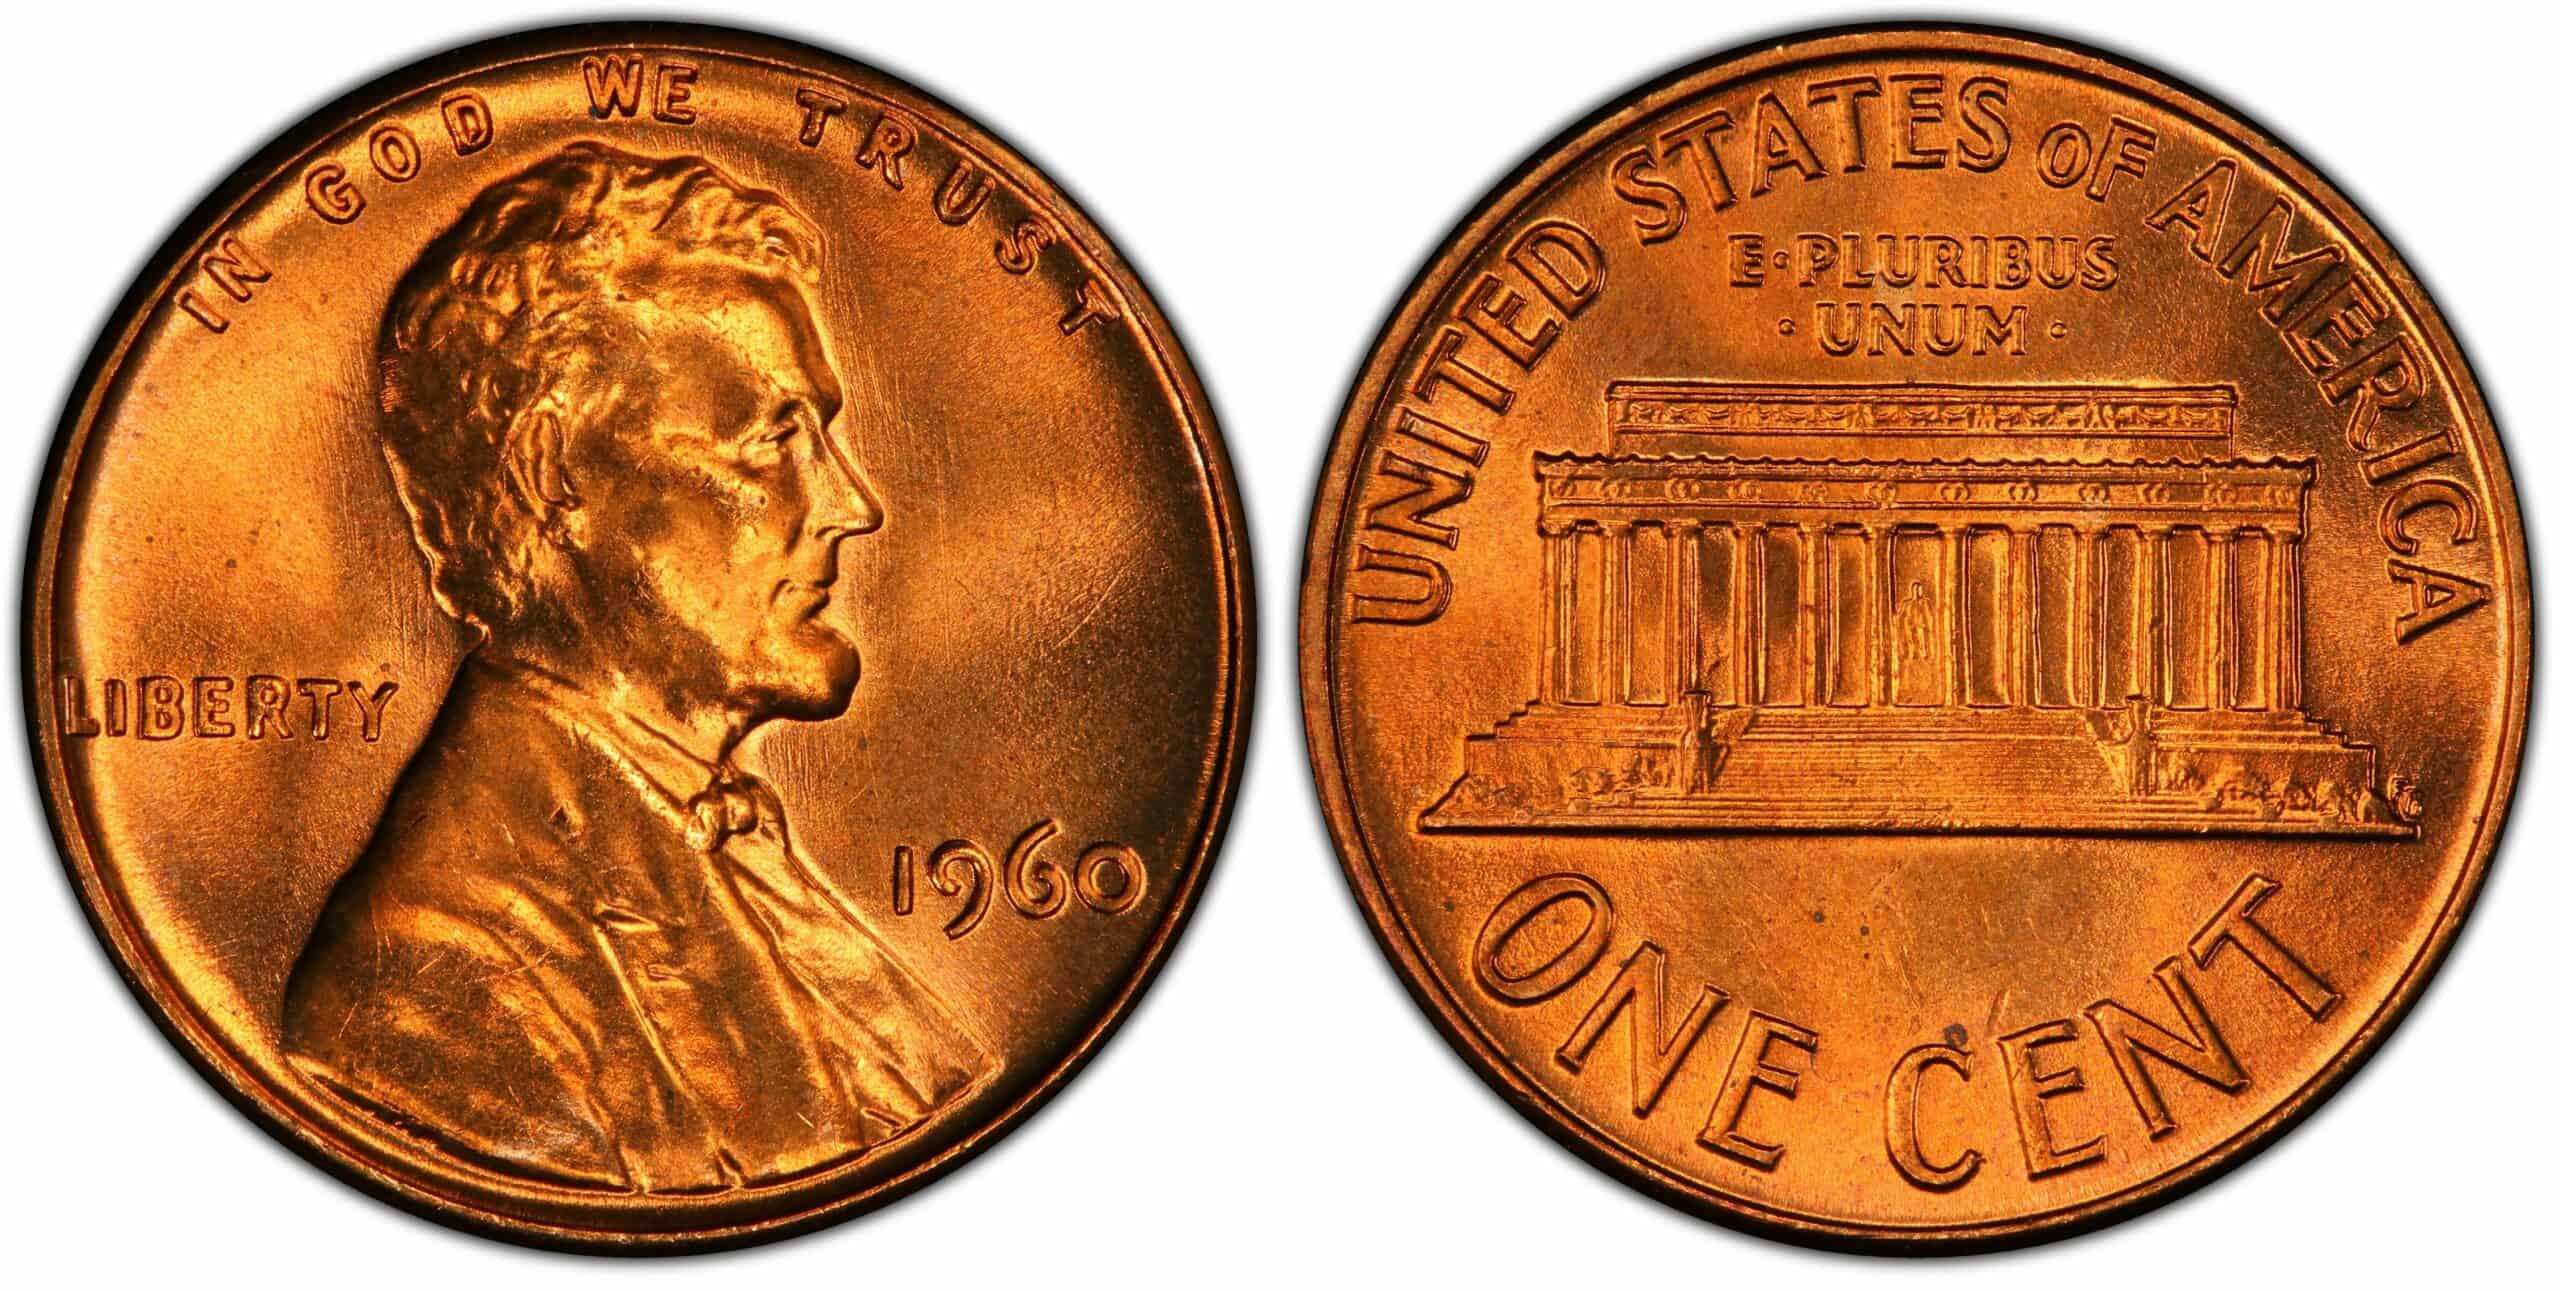 1960 No Mint Large Date Penny (P) Value